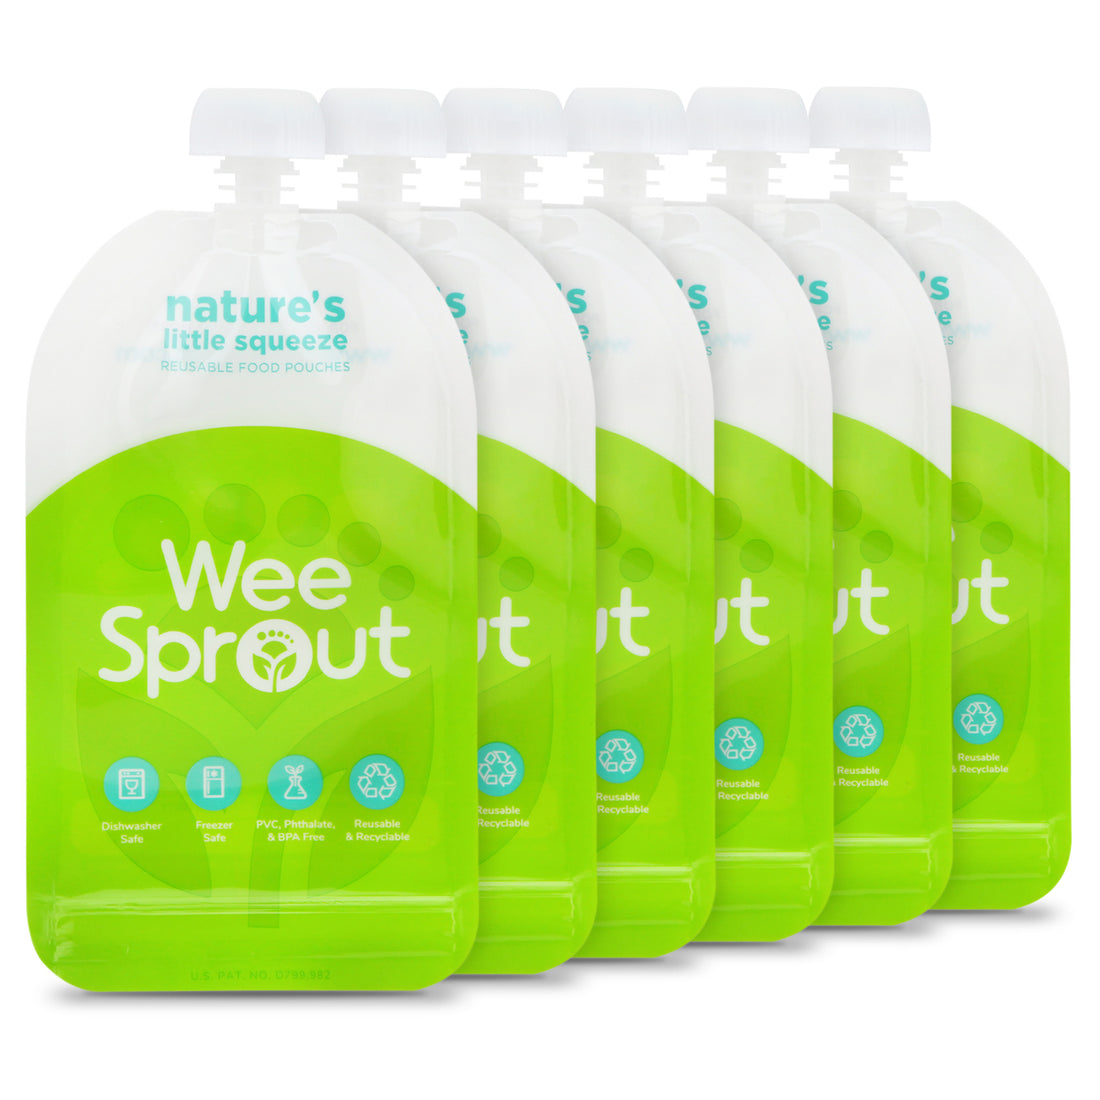 "Nature's Little Squeeze" Reusable Food Pouches - WeeSprout